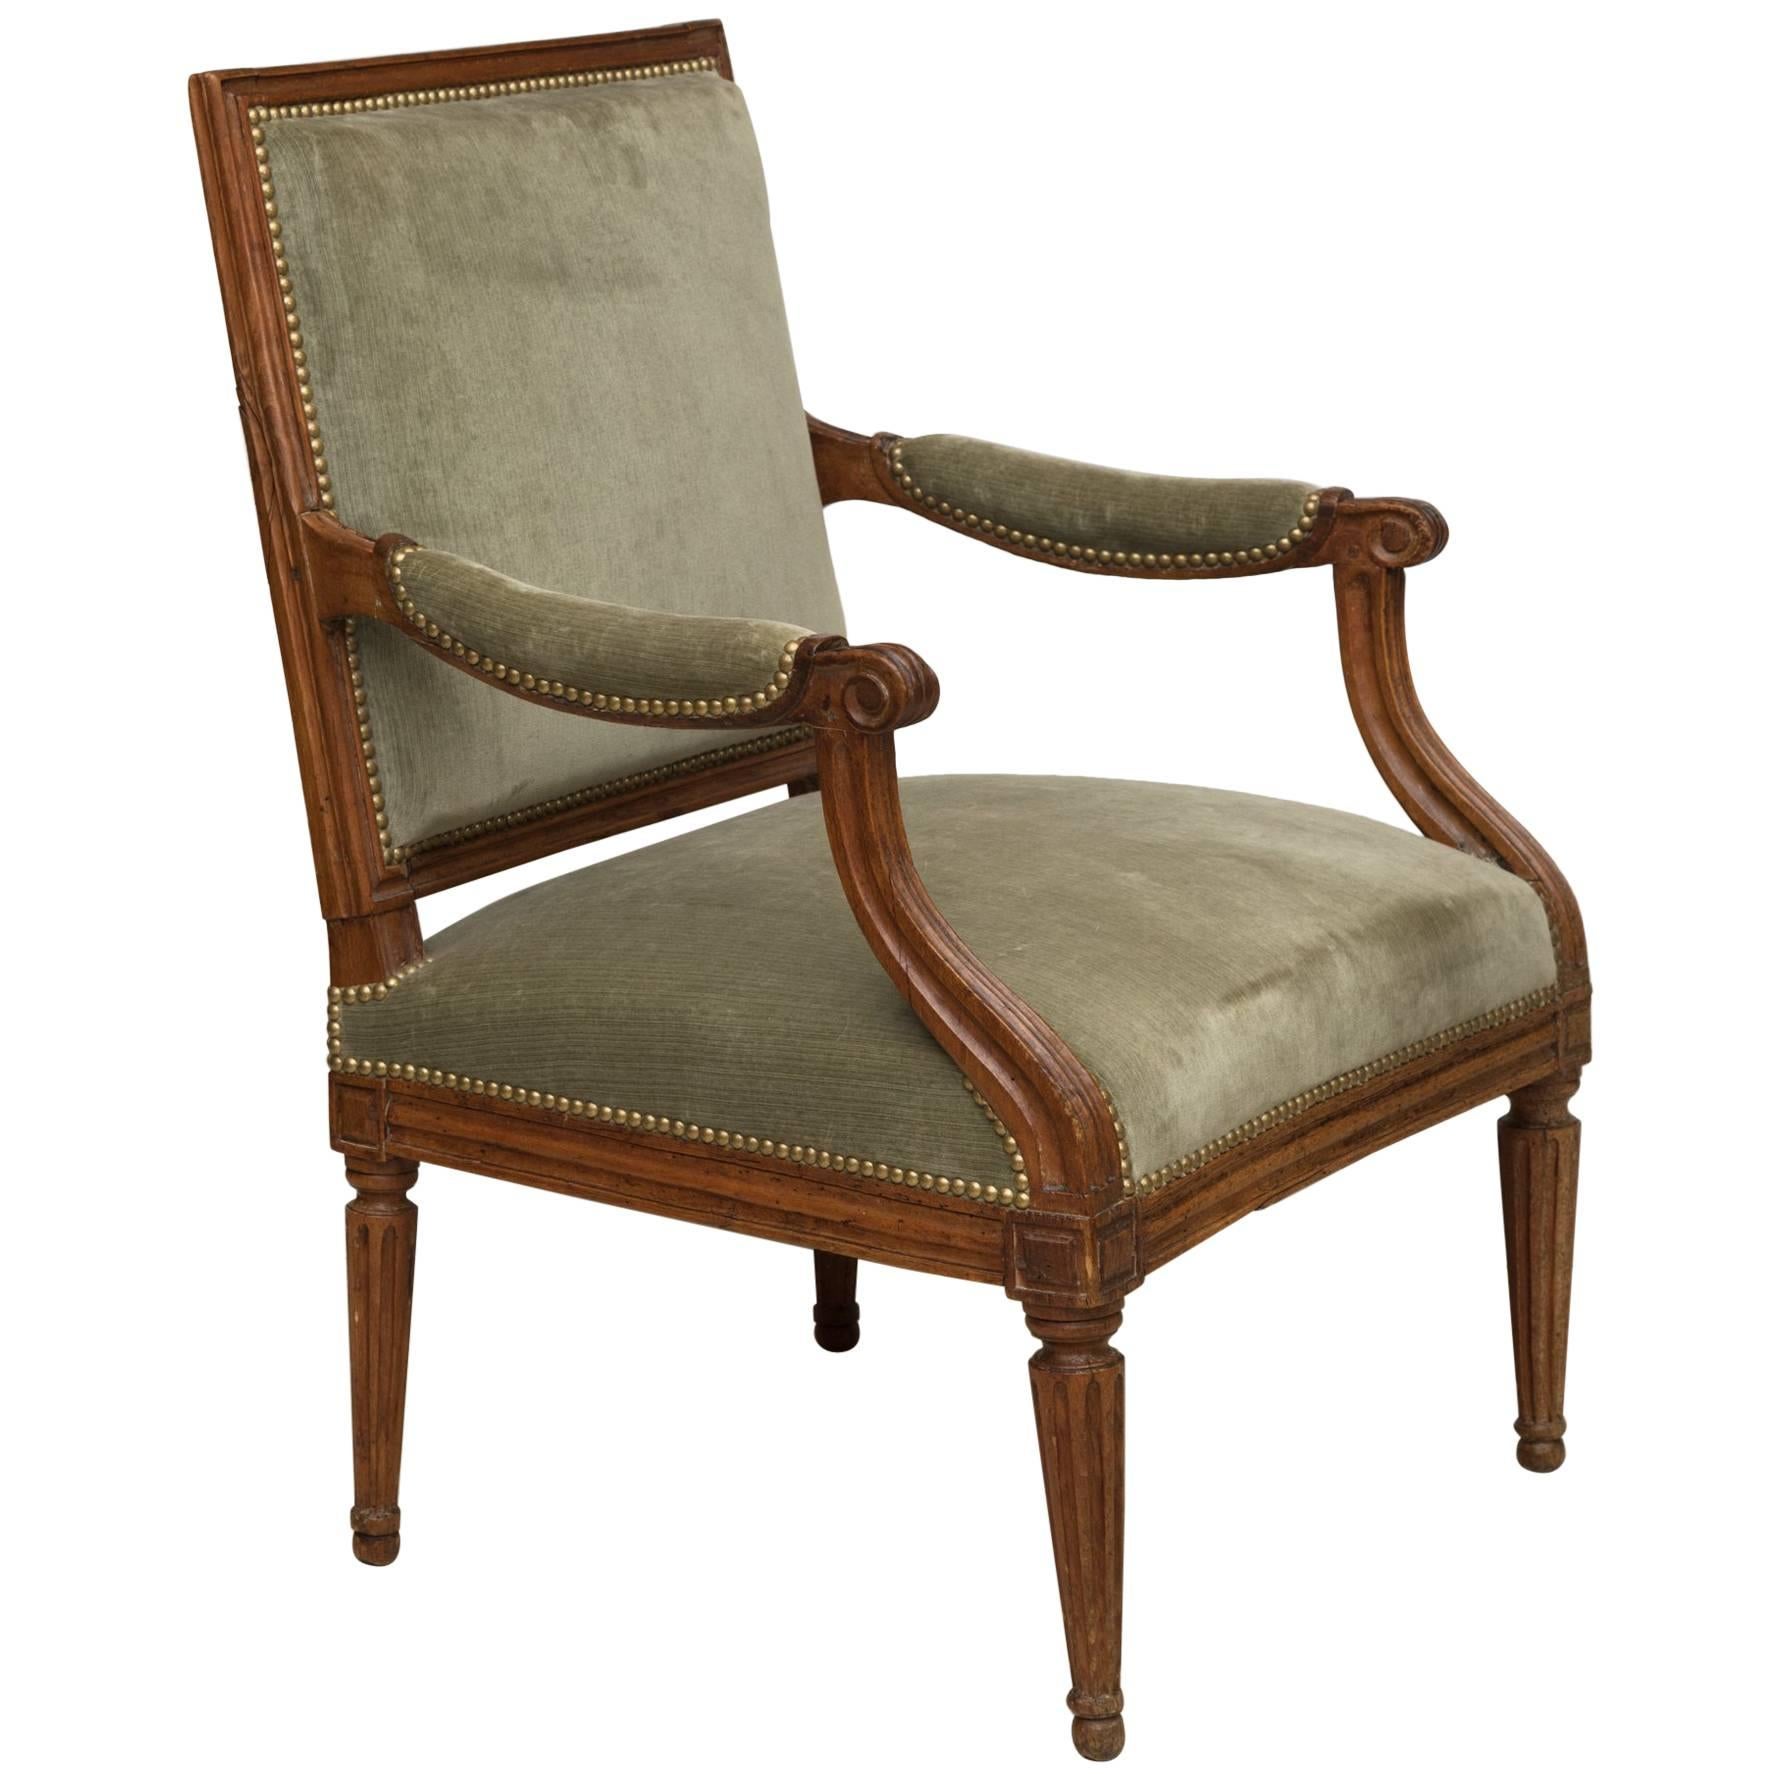 Louis XVI Beech Fauteuil or Armchair Upholstered in Sage Green Velvet For Sale